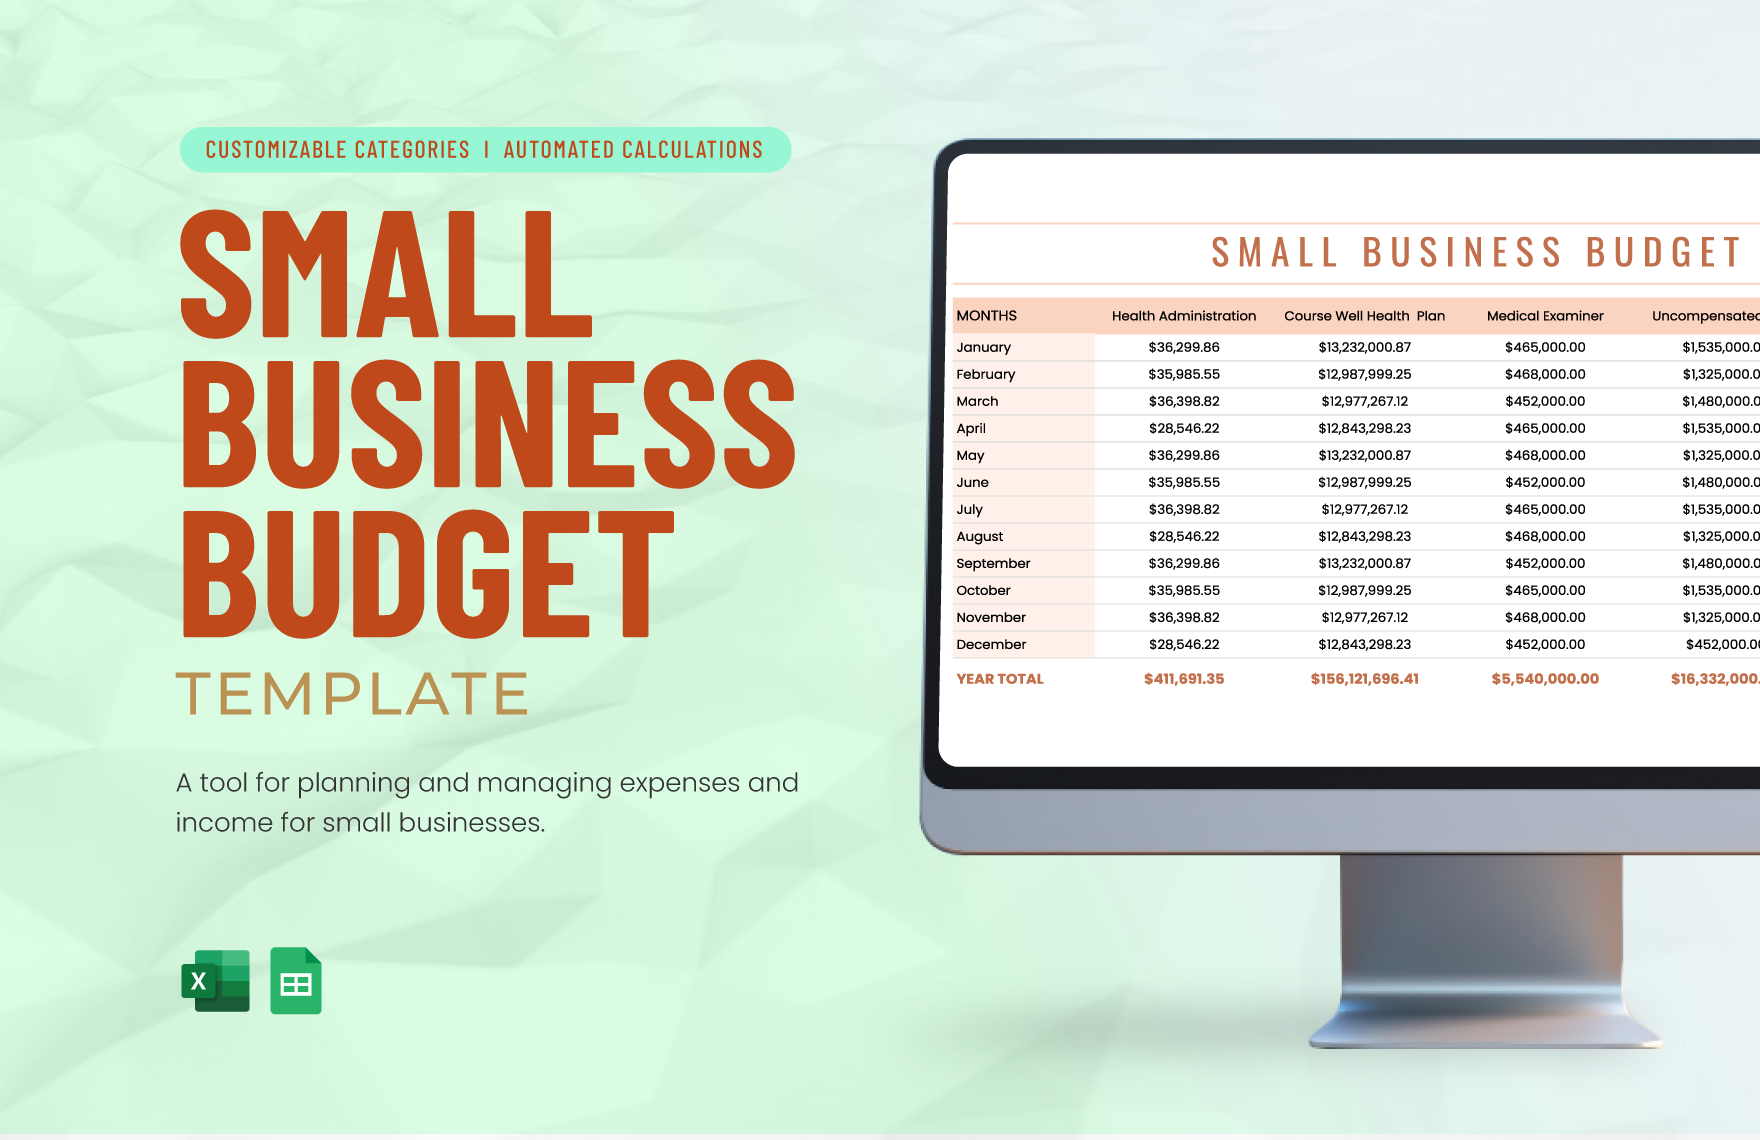 Small Business Budget Template in Excel, Google Sheets